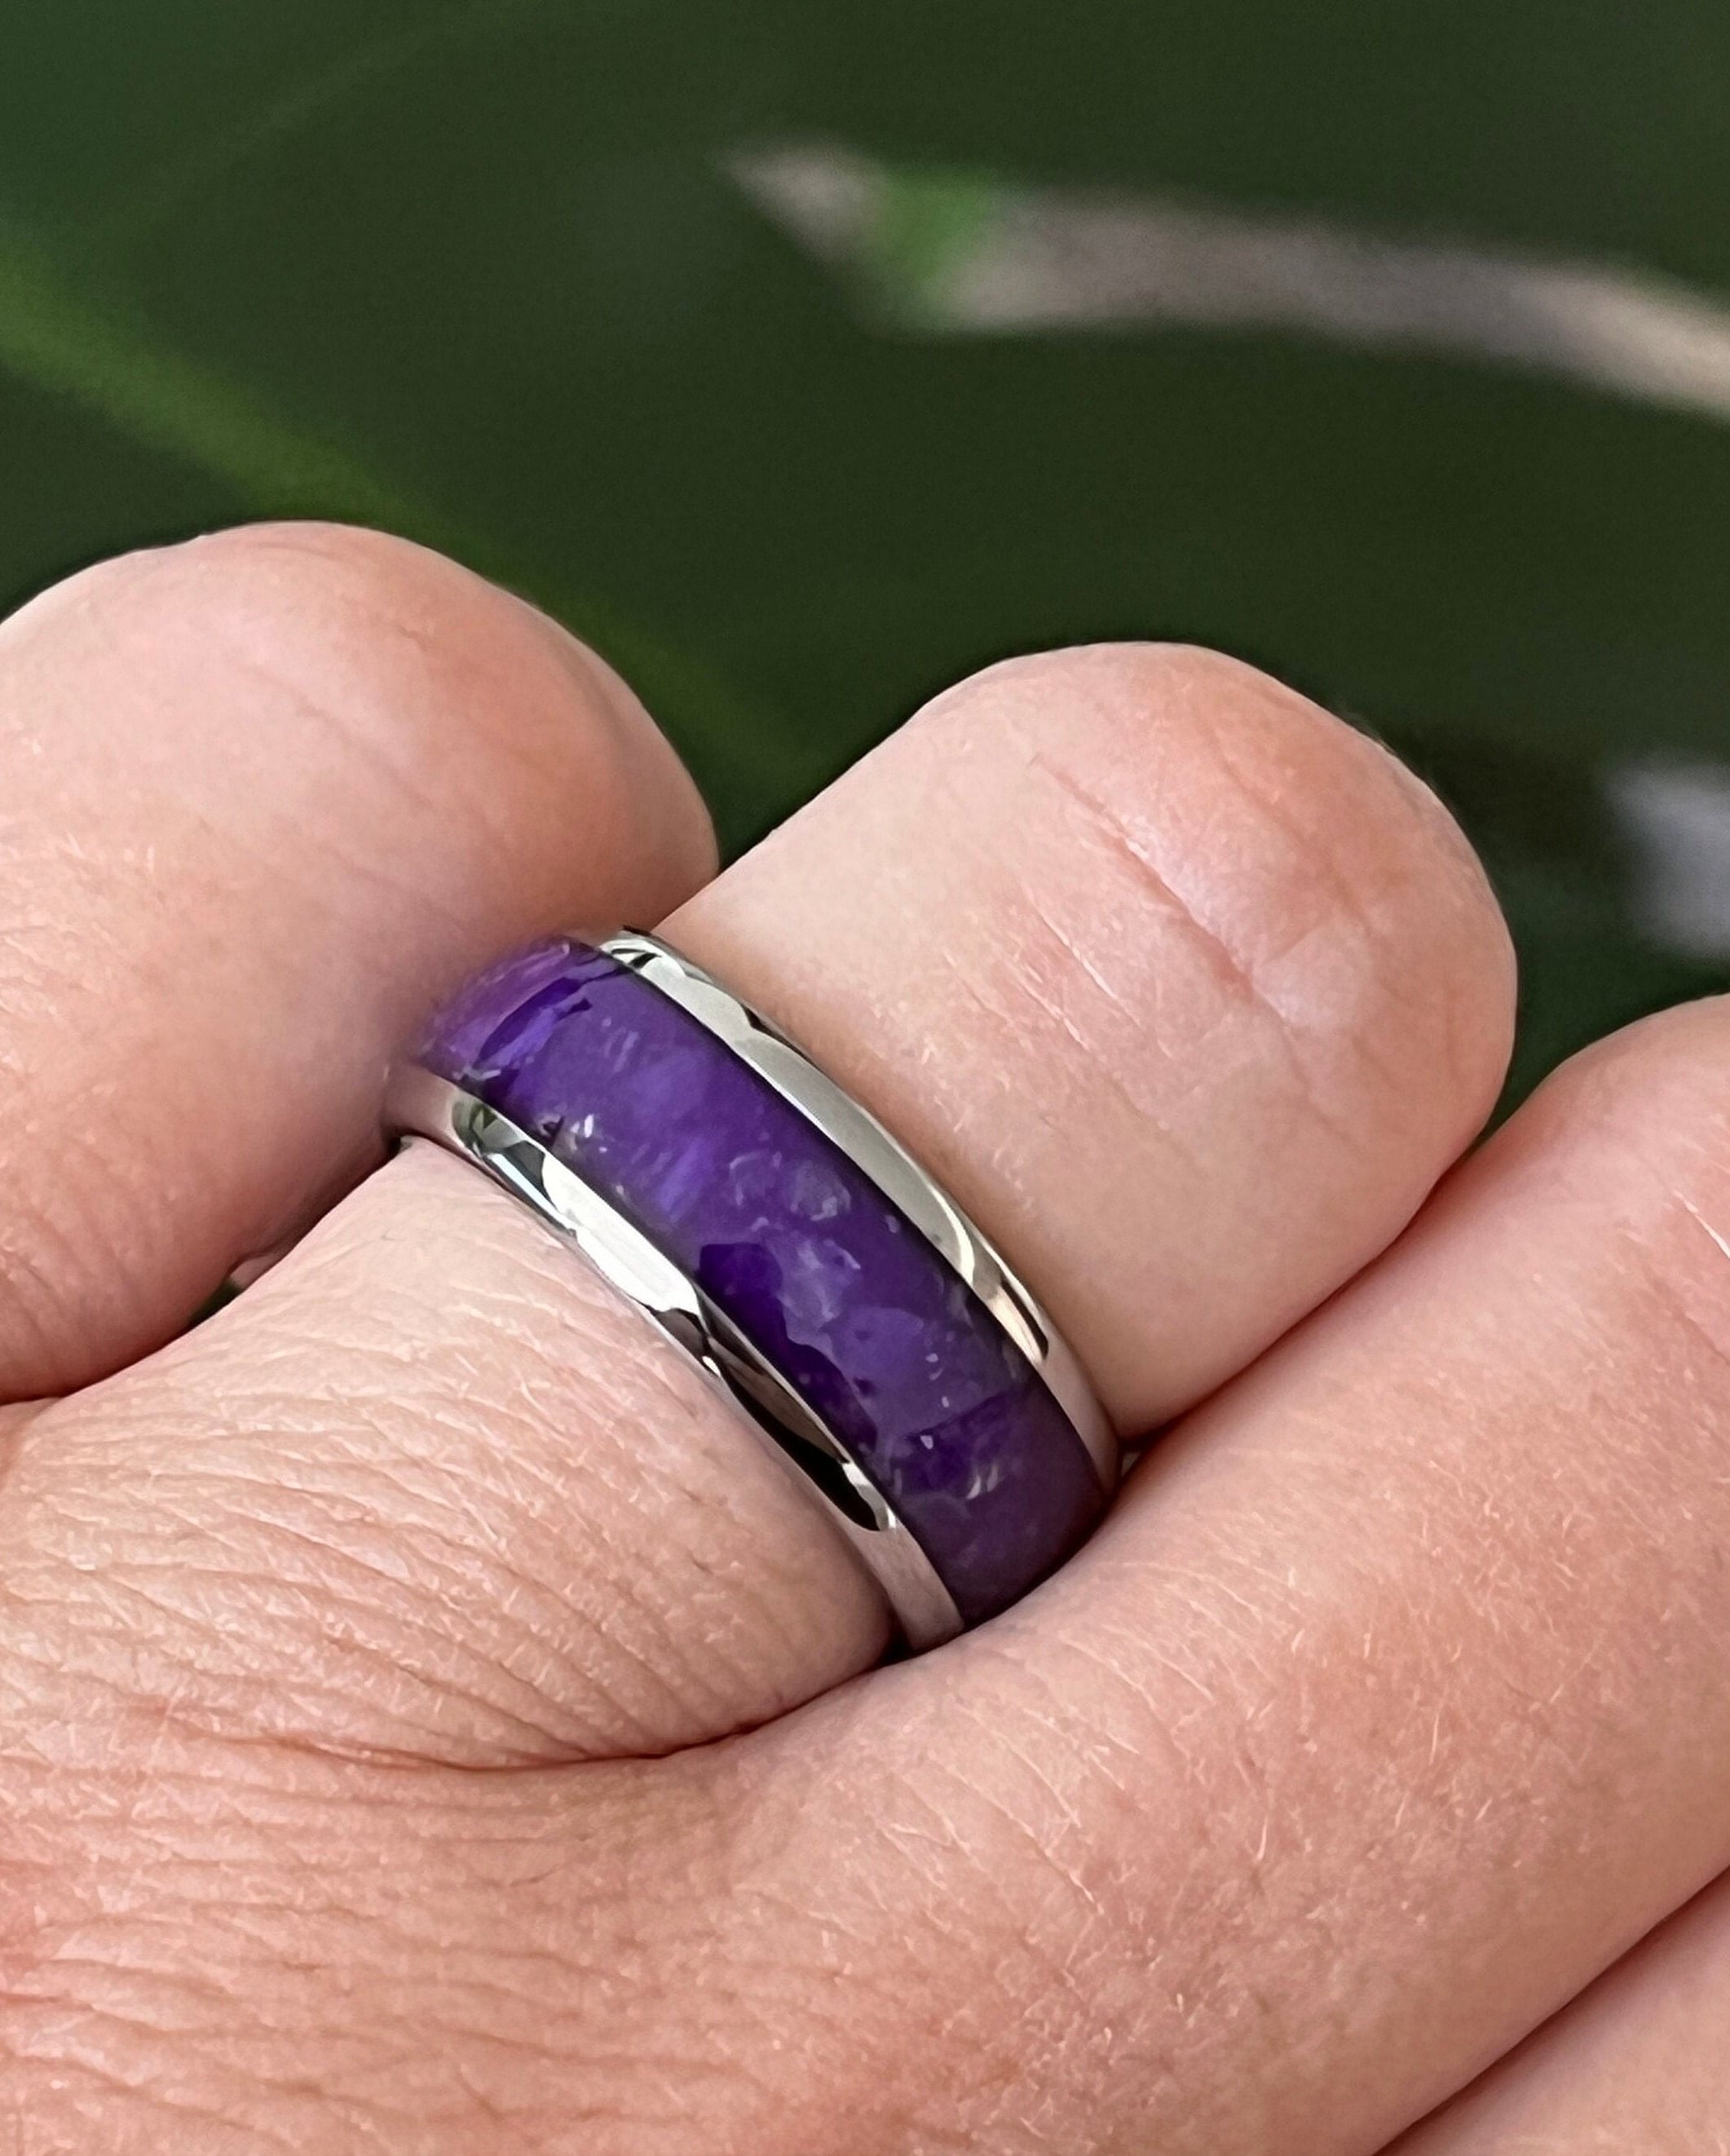 Duality (Royal Purple) - Men's Titanium and Resin Ring – Richter Scale Rings